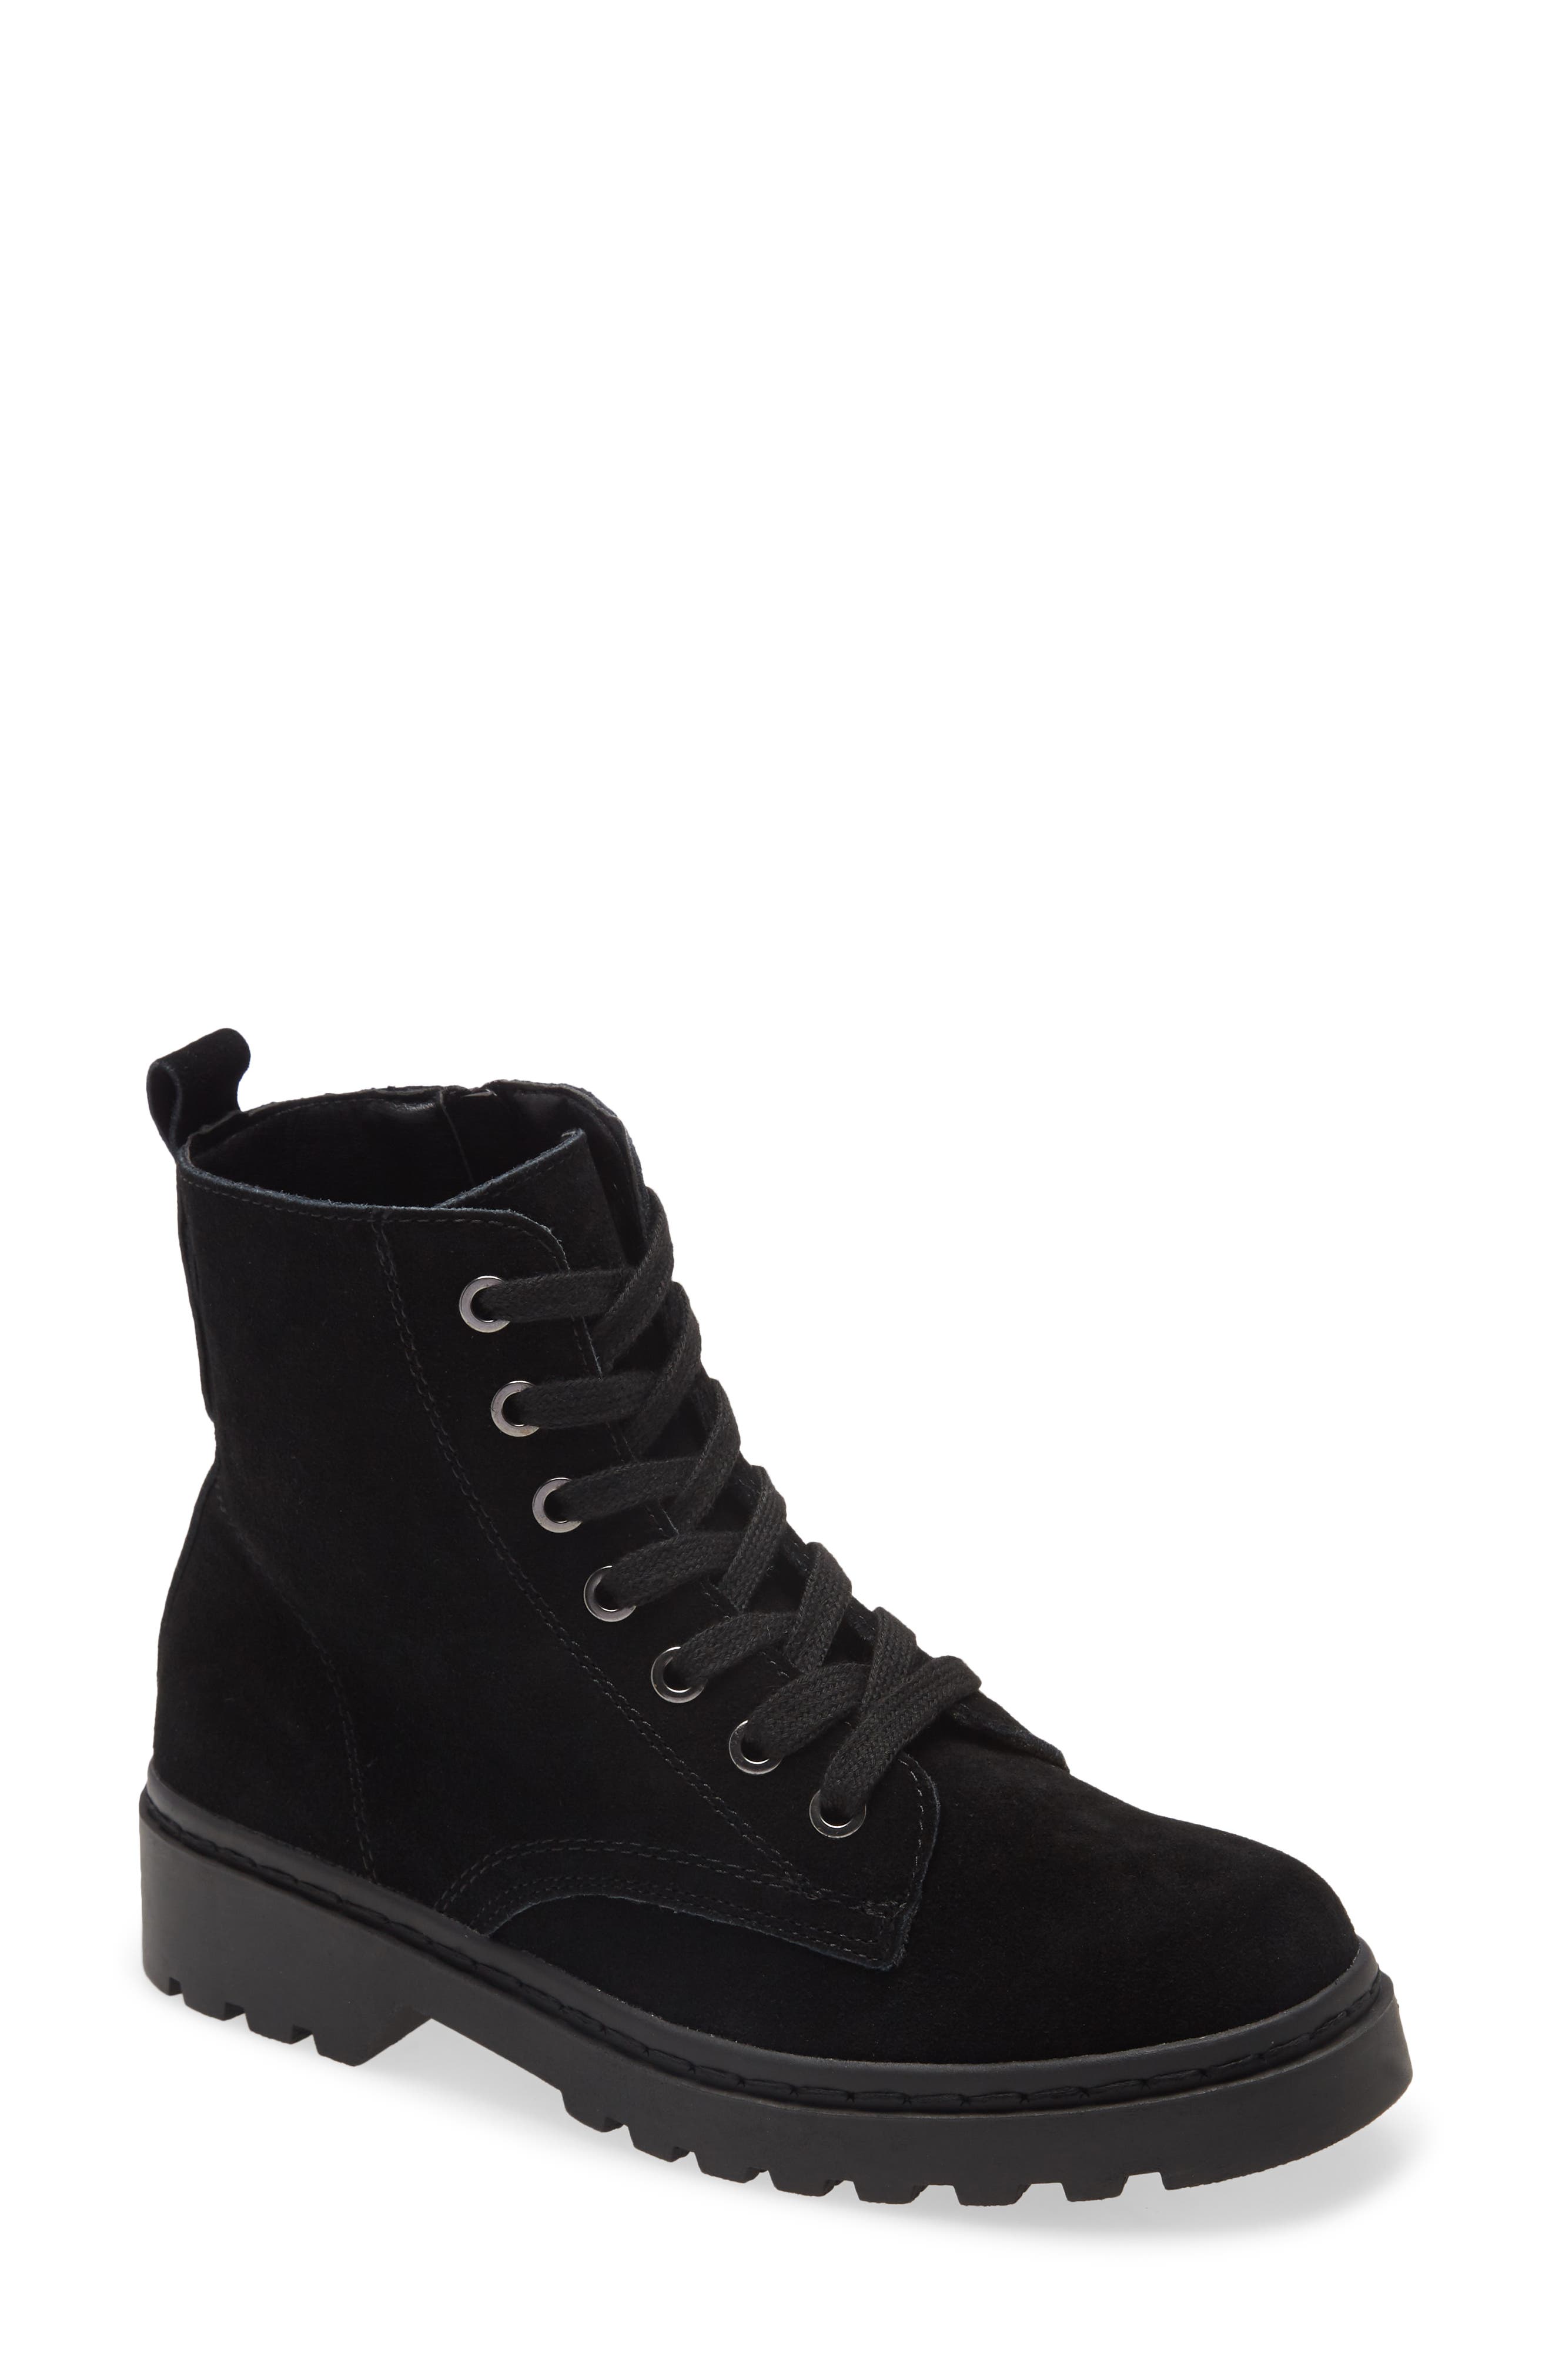 TOPSHOP | Bumble Lace-Up Boot 